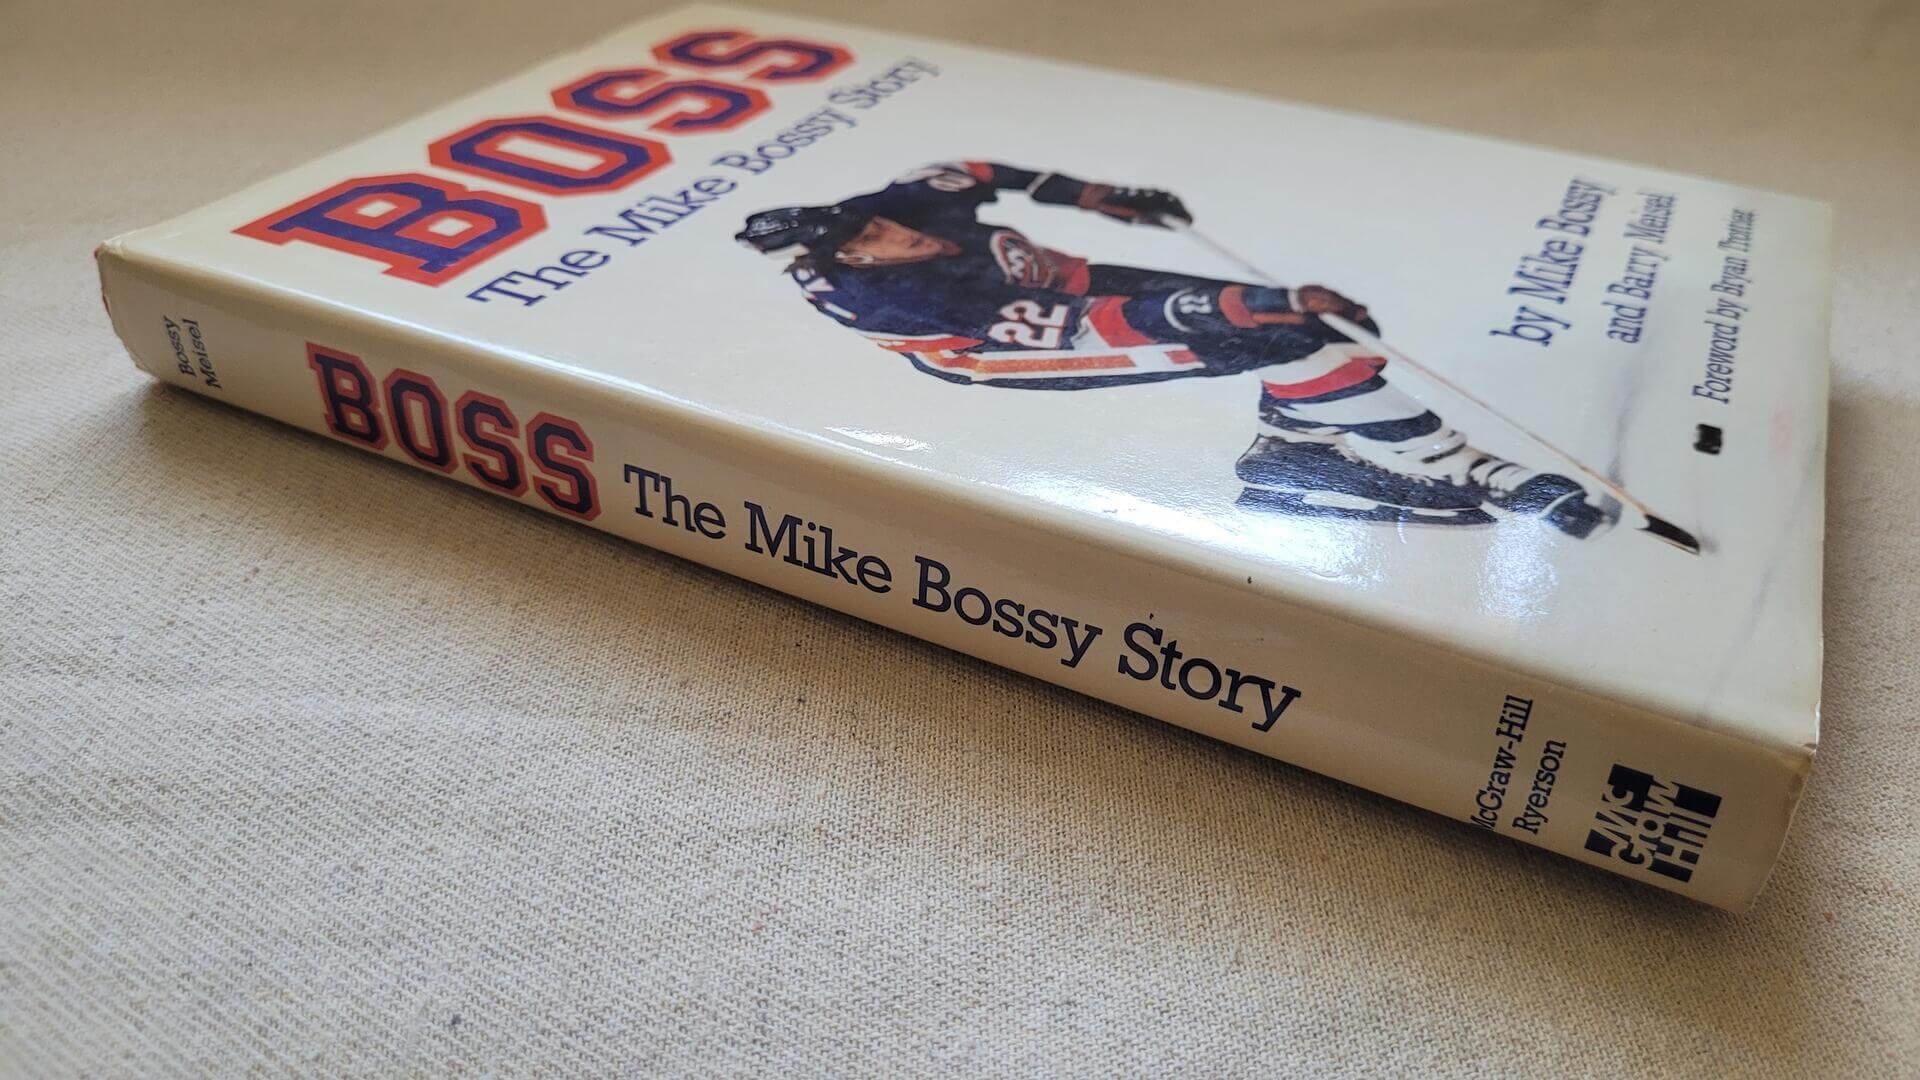 Boss : The Mike Bossy Story  book by a genuine superstar and a hero on how hockey was meant to be played - Vintage & rare collectible books isbn 0075496968